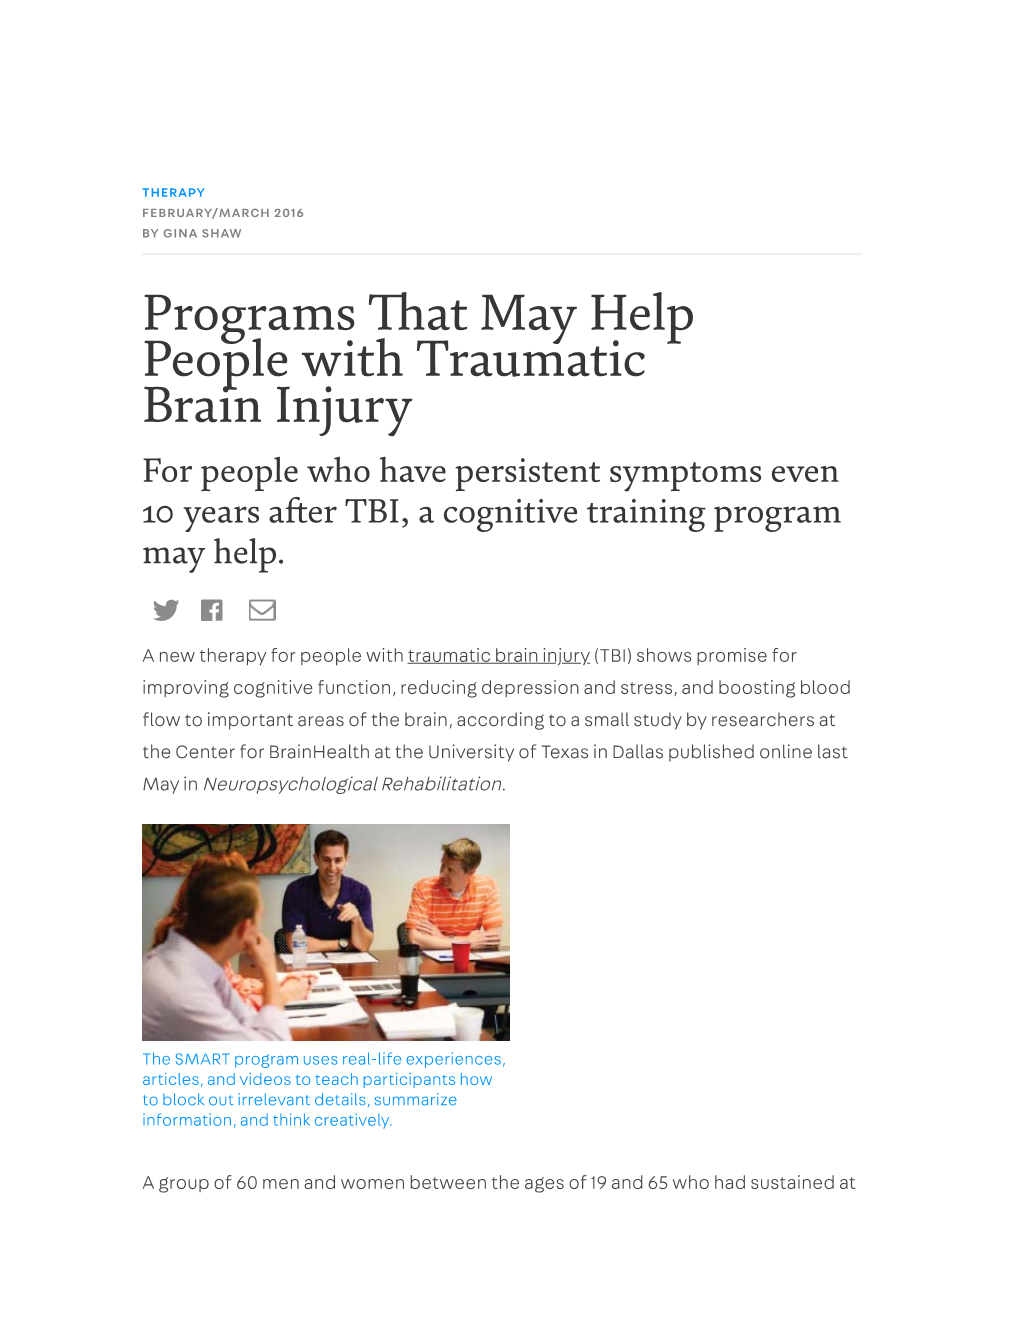 Programs at May Help People with Traumatic Brain Injury